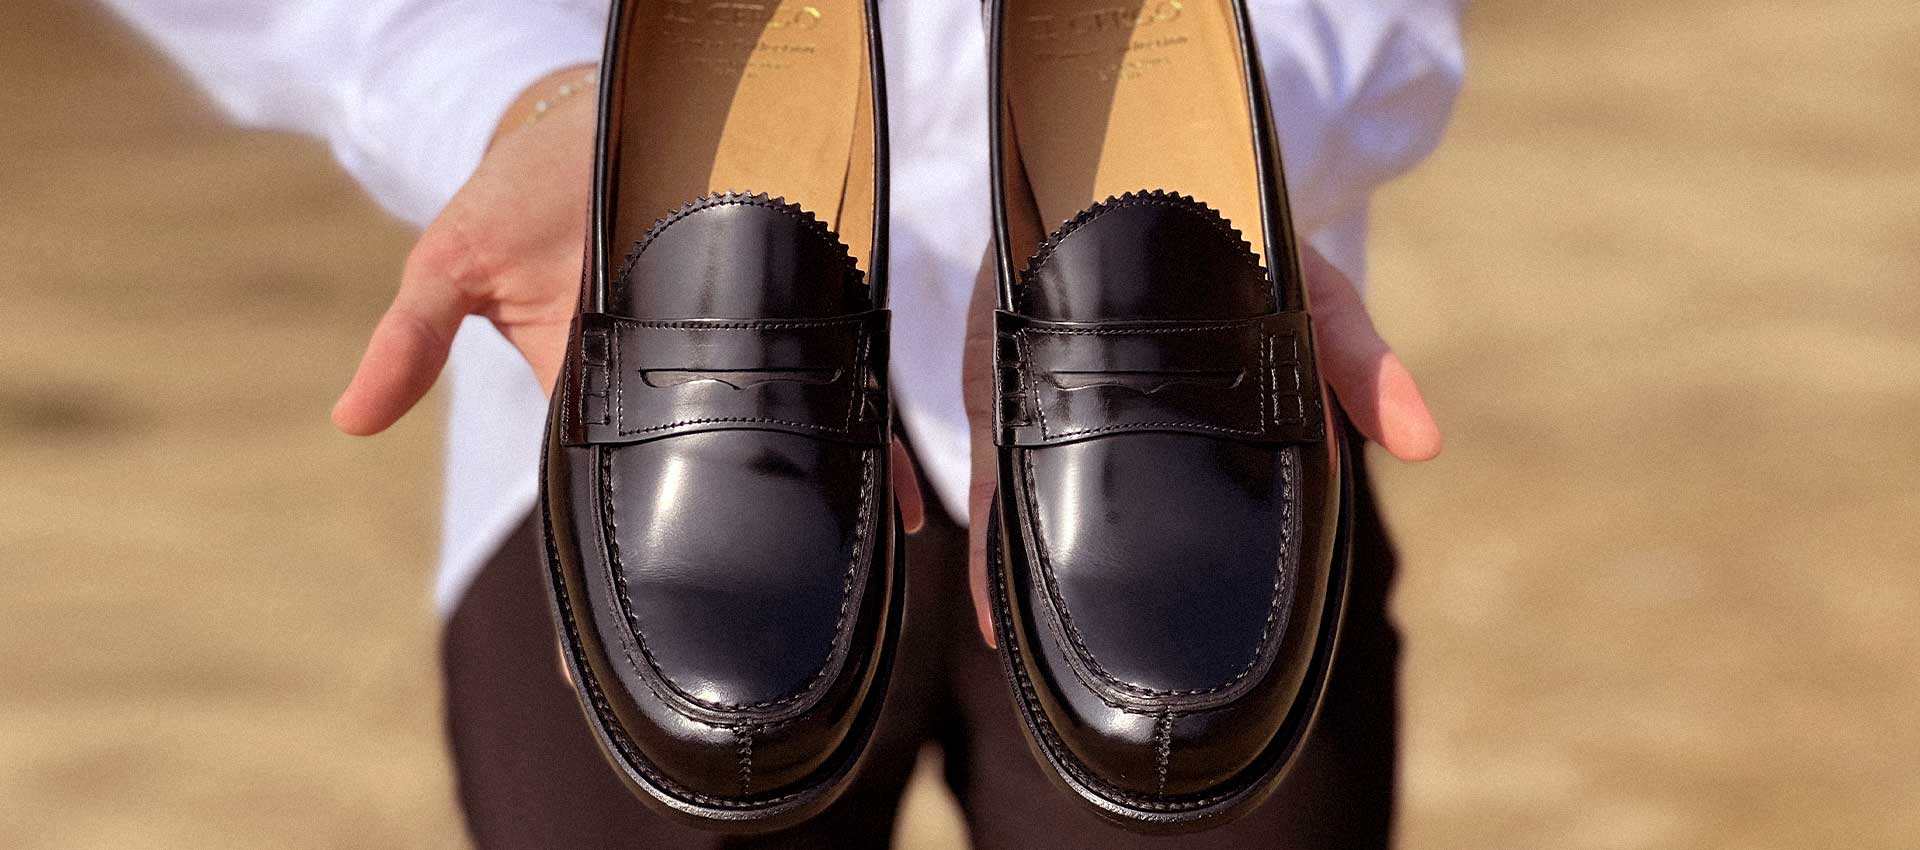 Women's Loafers and Buckles | Il Gergo